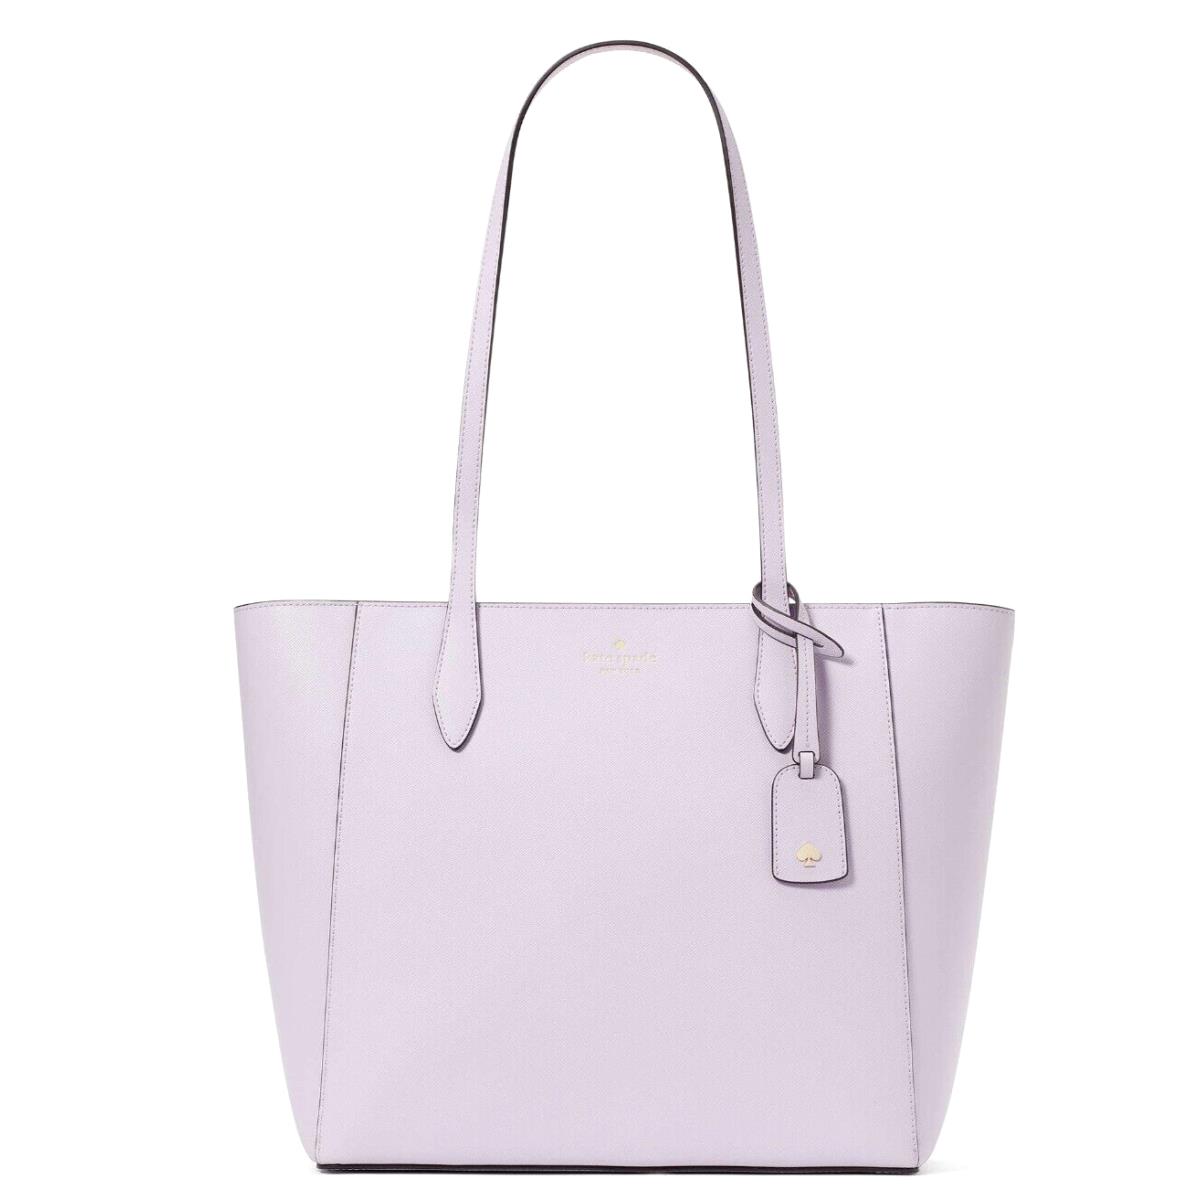 New Kate Dana Saffiano Tote Violet Spritz with Dust Bag